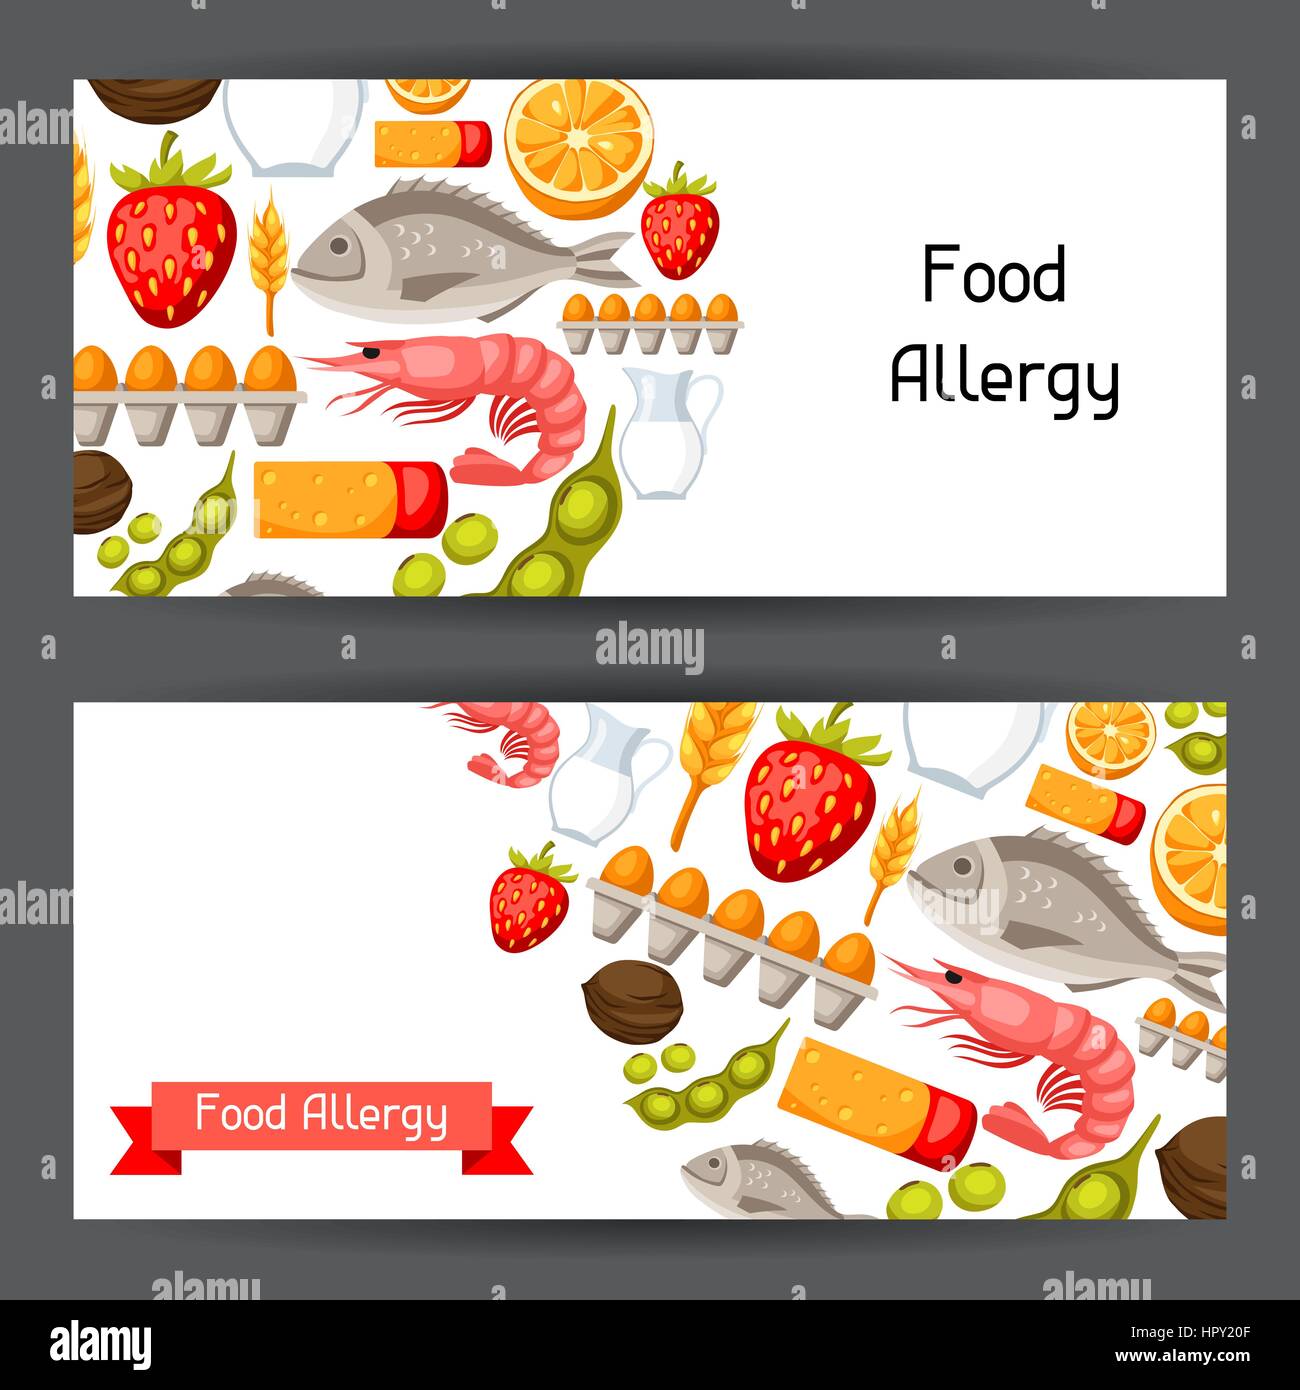 Food allergy banners with allergens and symbols. Vector illustration for medical websites advertising medications Stock Vector